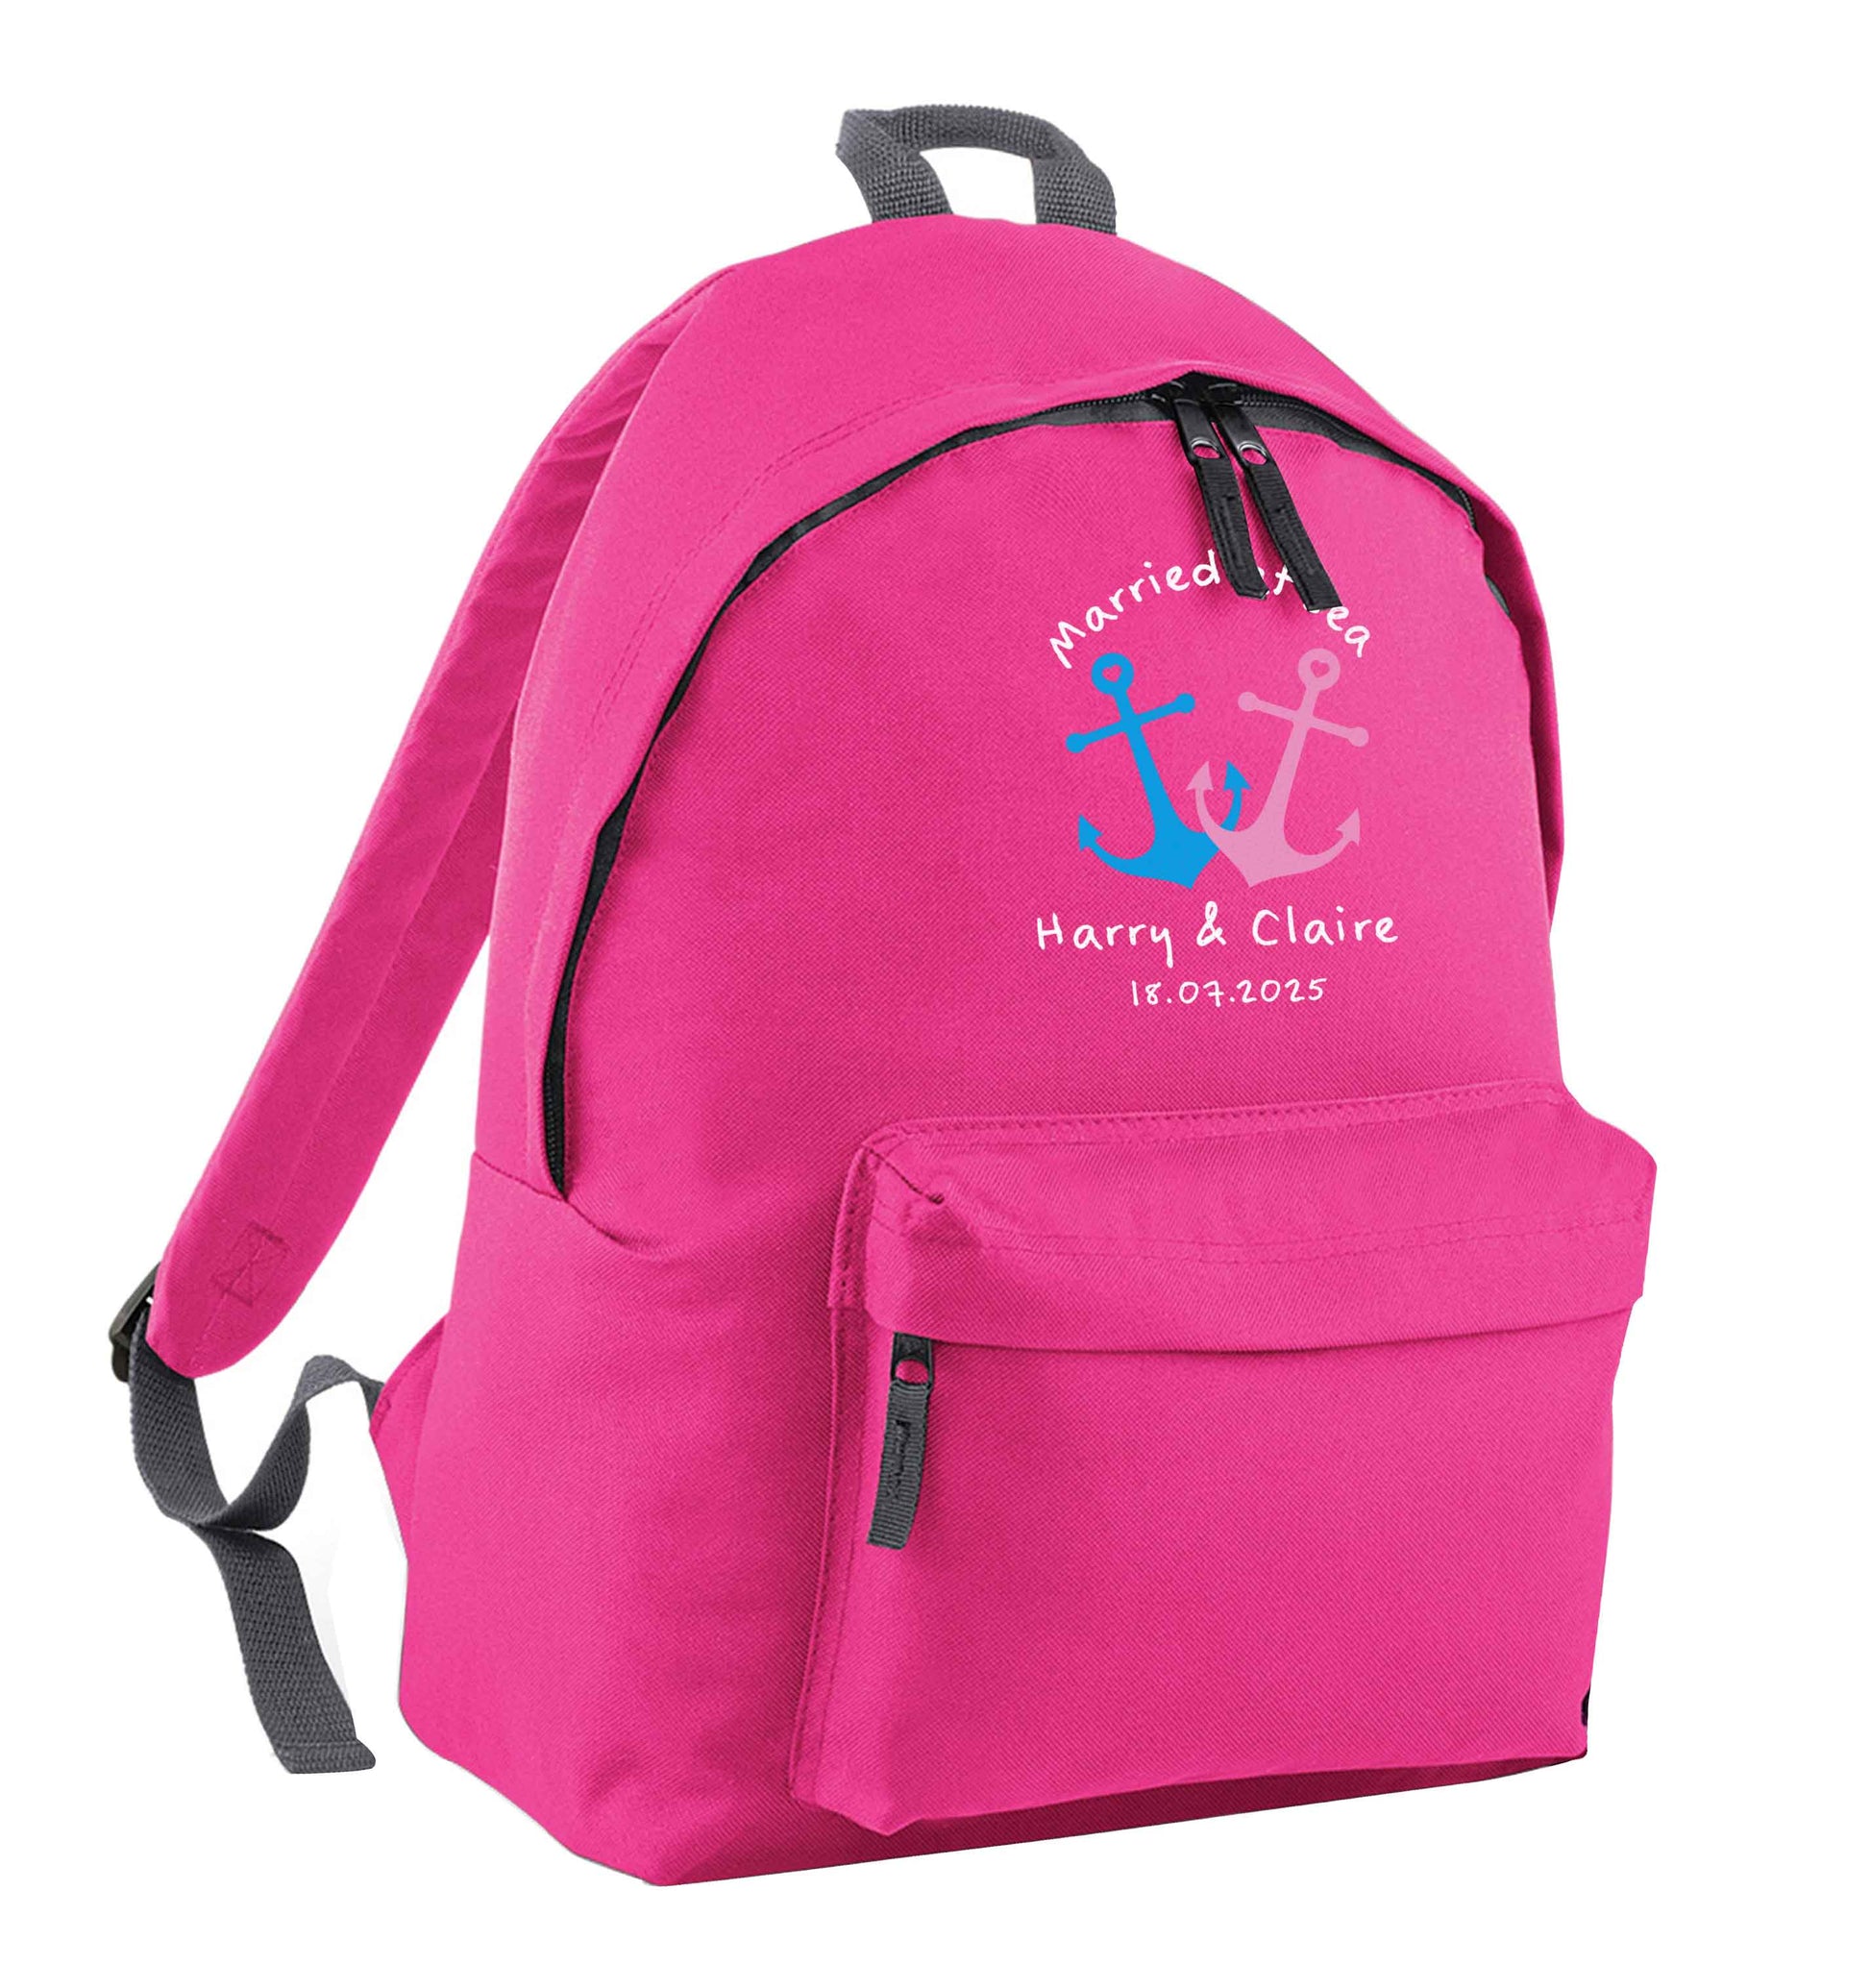 Married at sea pink adults backpack